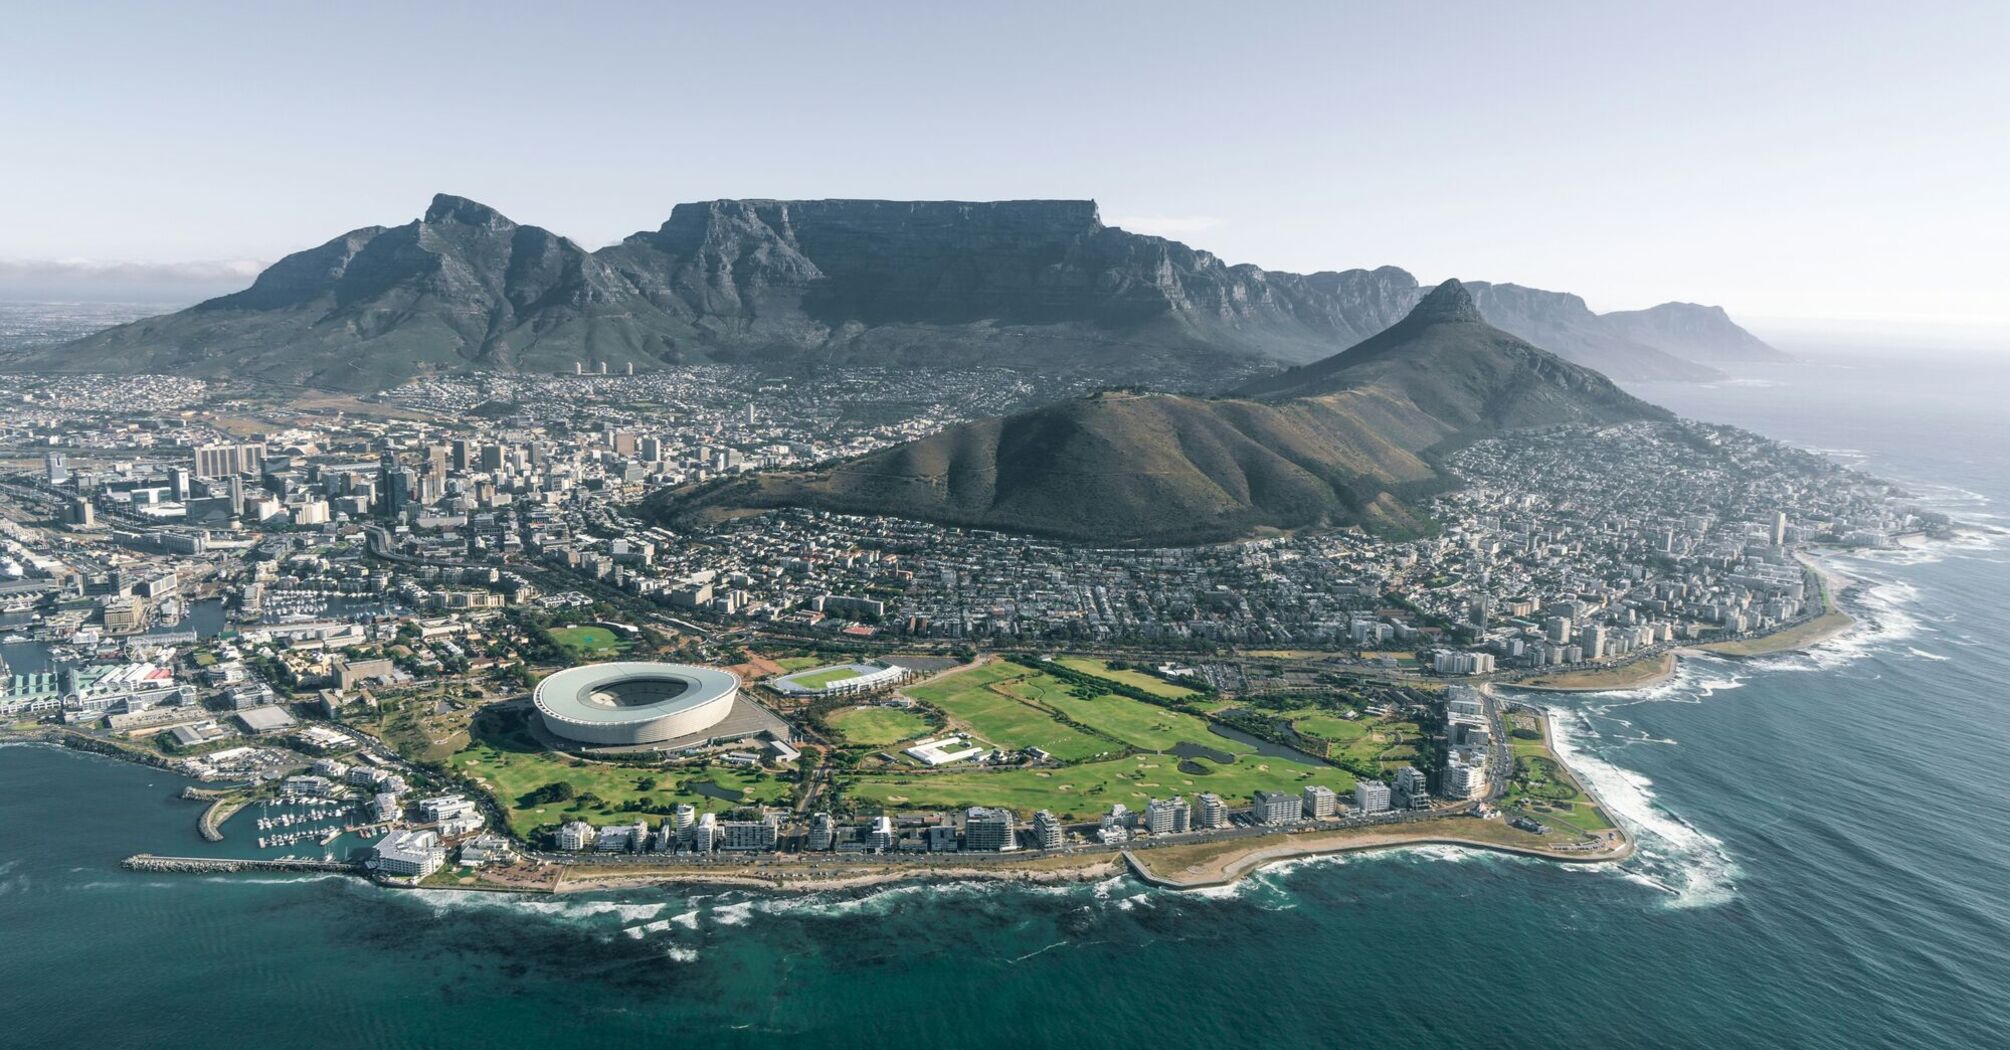 Helicopter view of Cape Town, South Africa